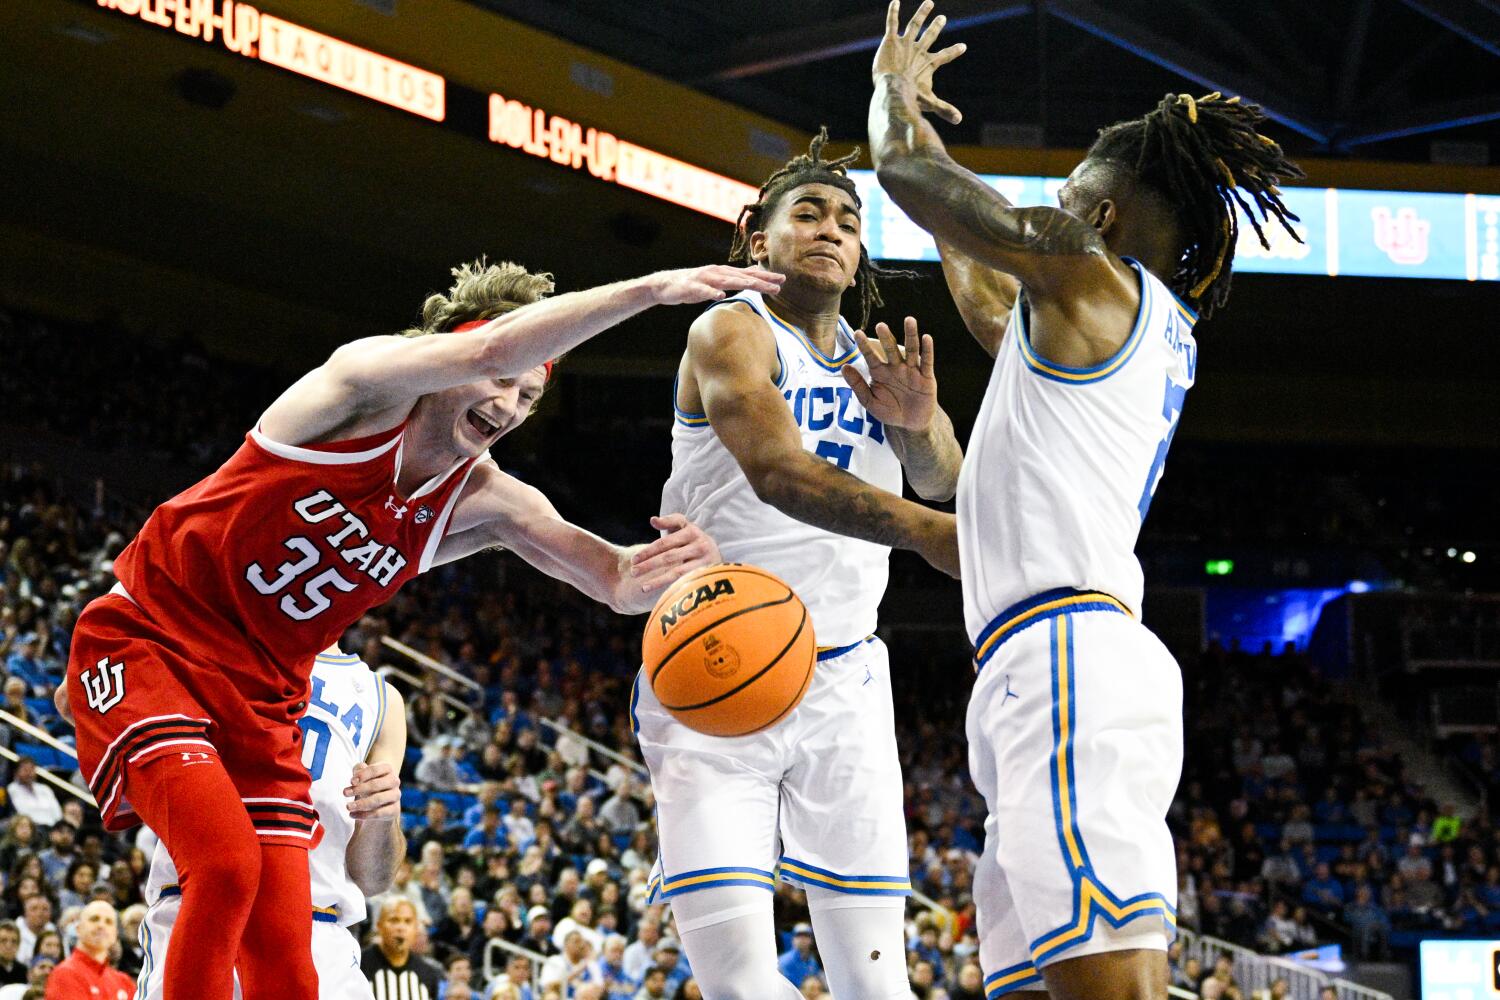 Plaschke: Another maddening loss dims UCLA's March hopes